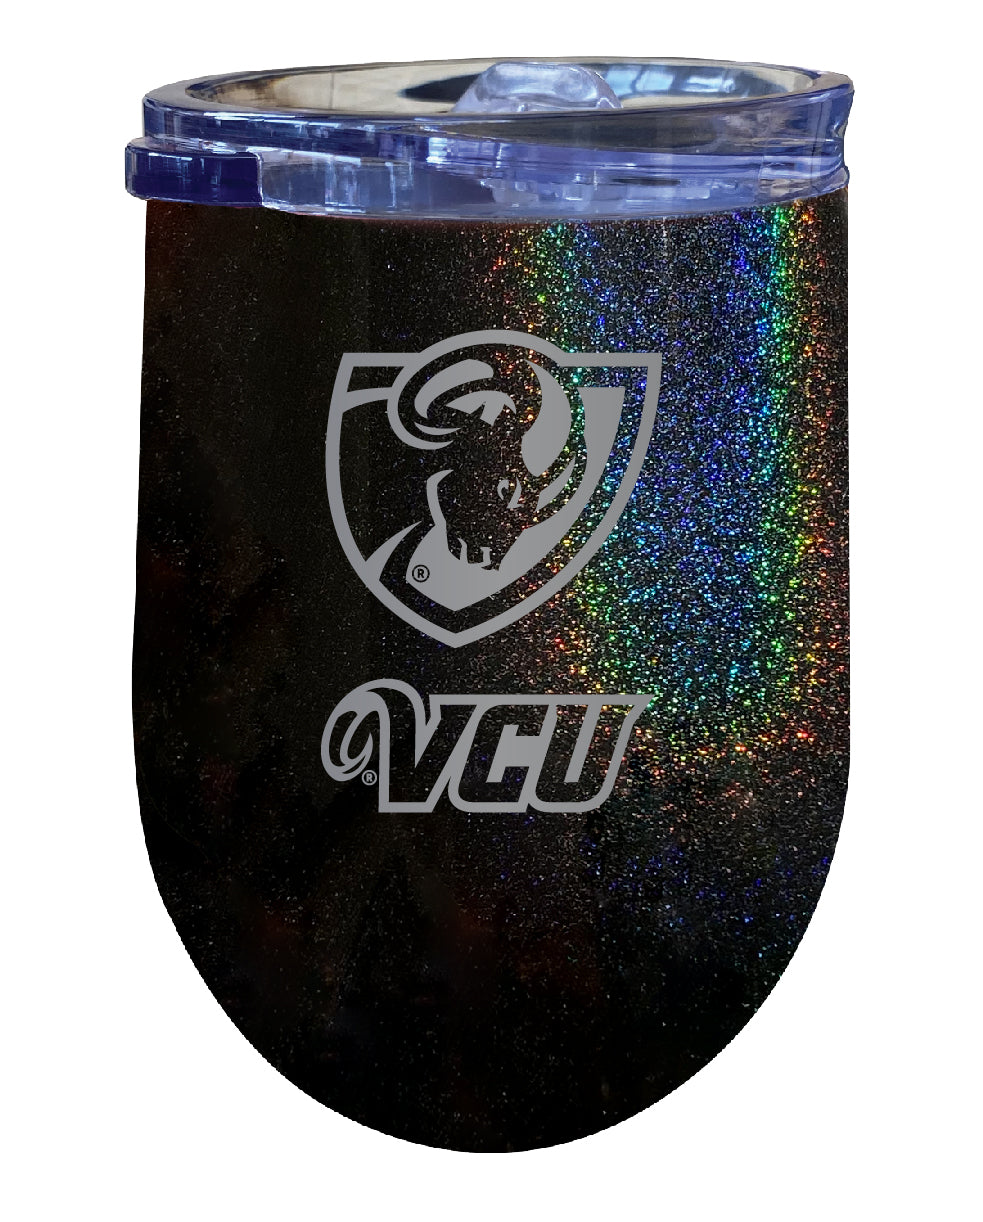 Virginia Commonwealth 12 oz Laser Etched Insulated Wine Stainless Steel Tumbler Rainbow Glitter Black